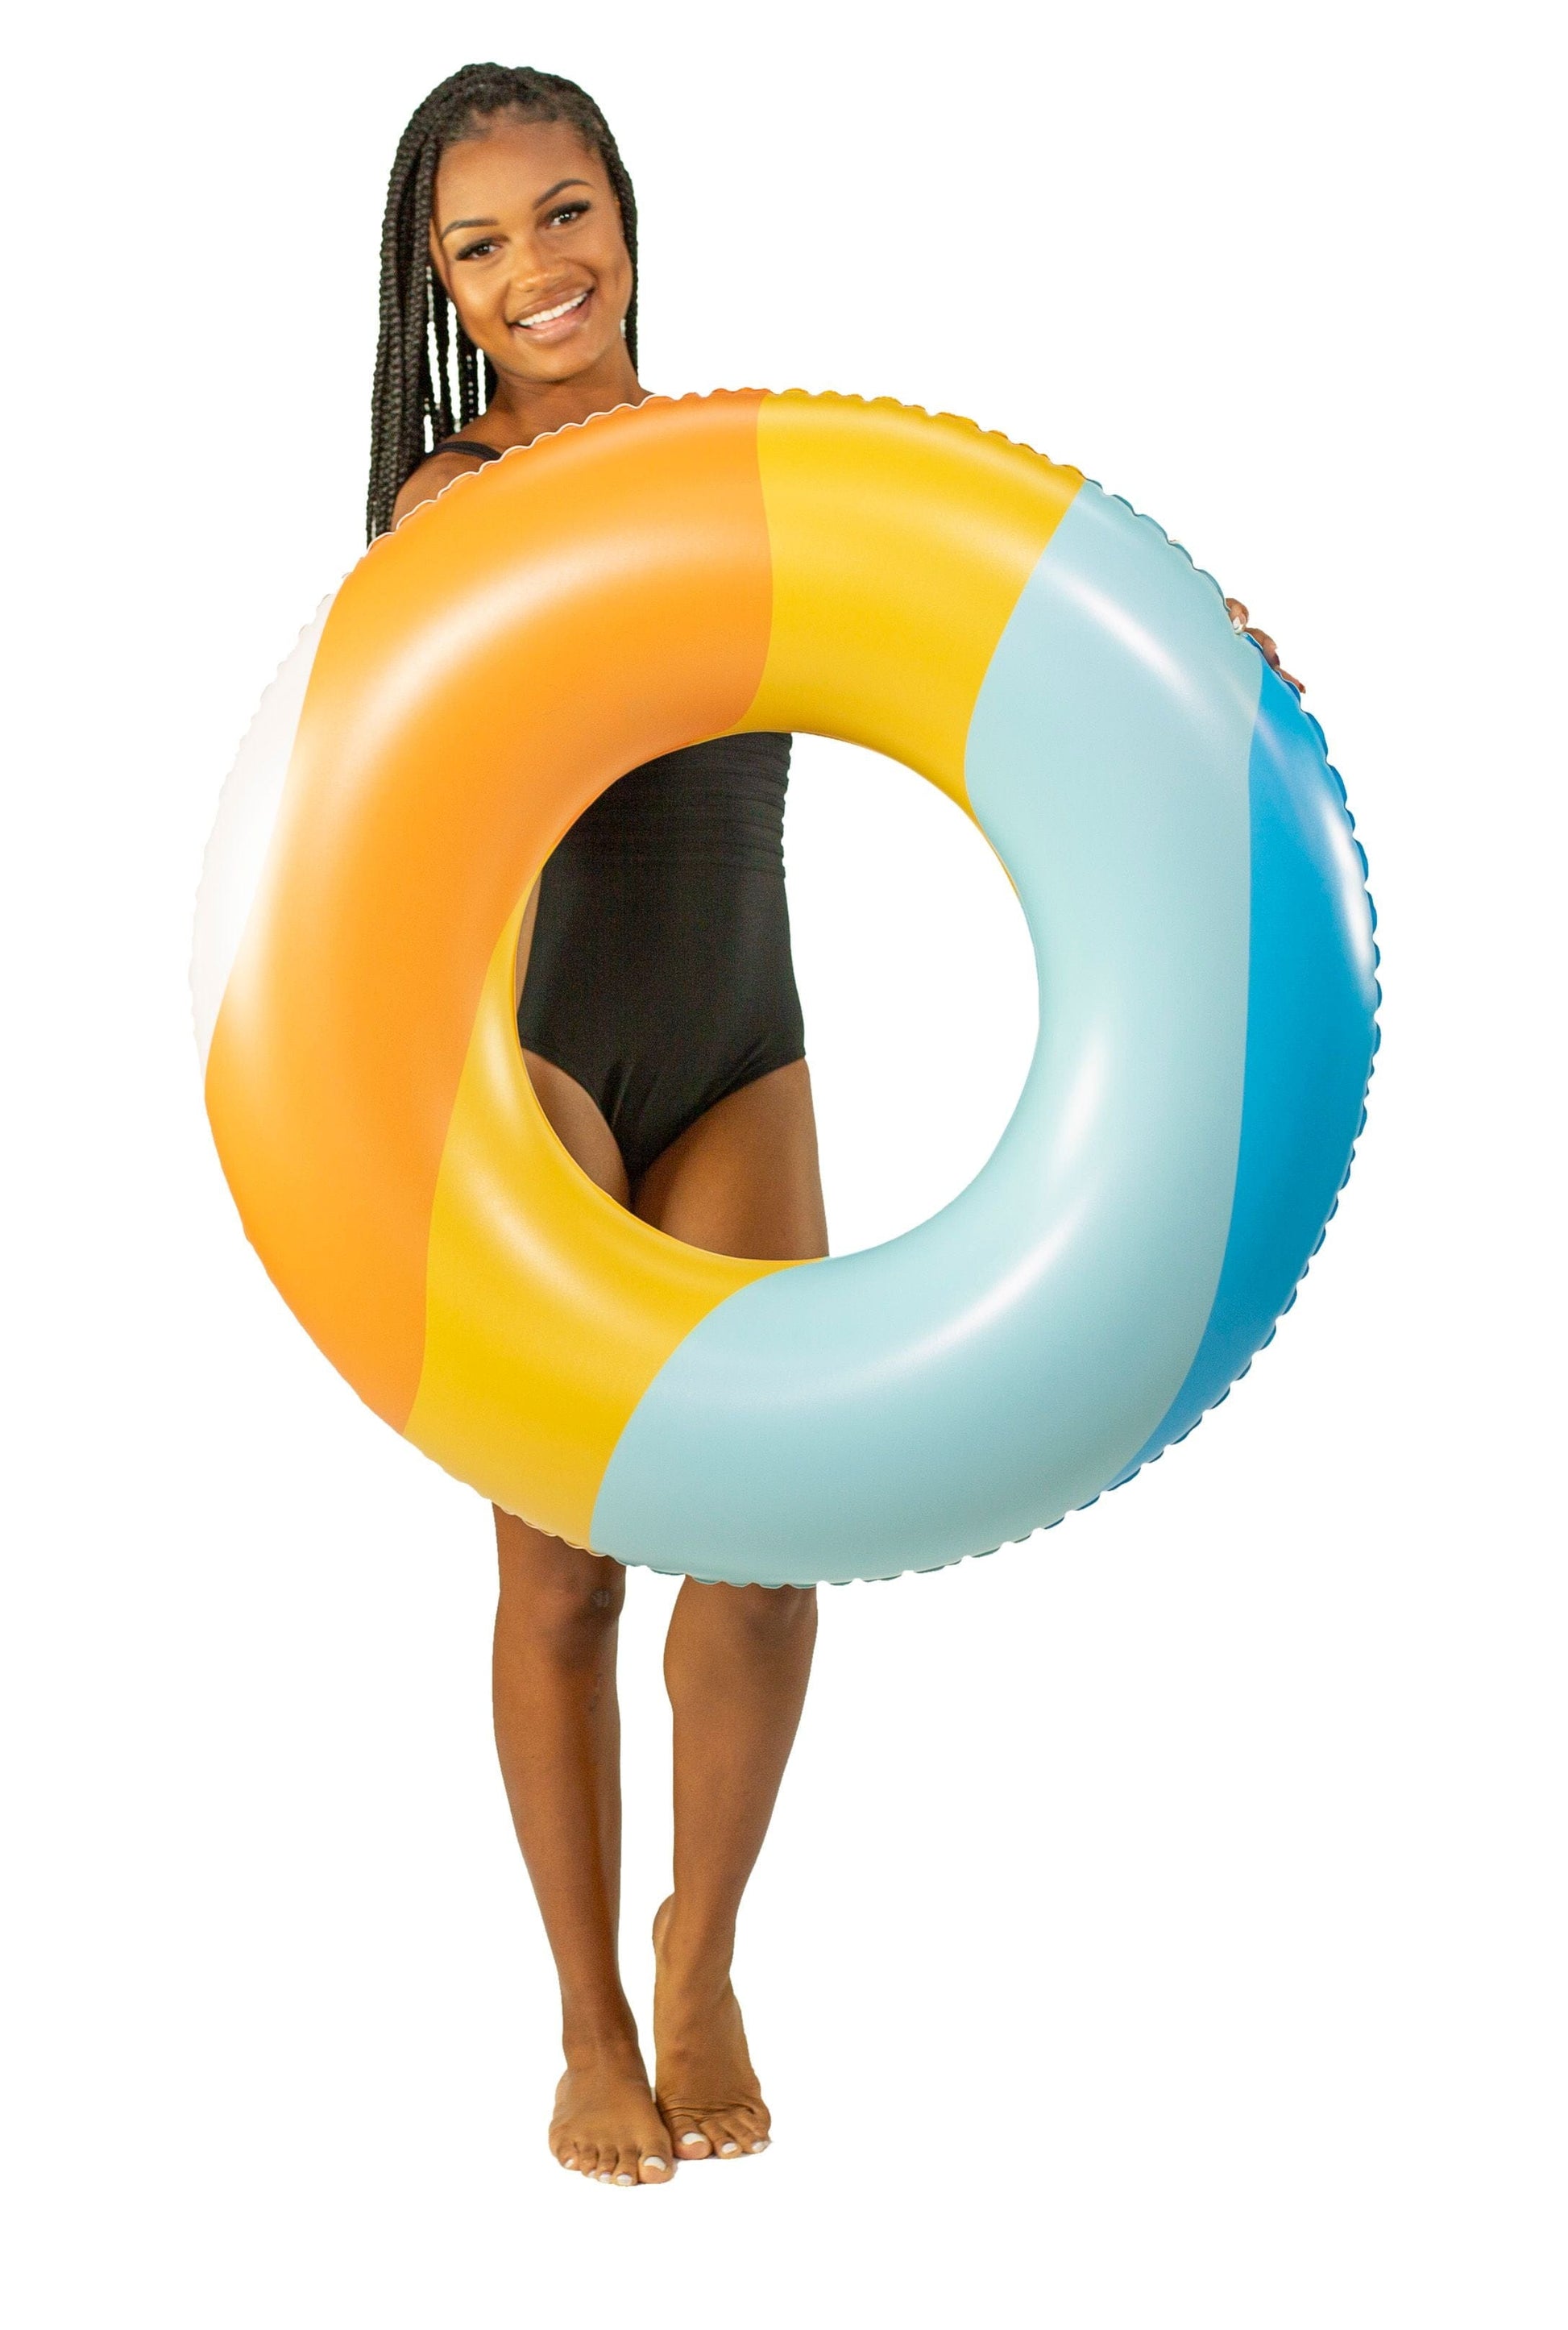 Inflatable Pool Tube Good Vibes Collection 36 inch